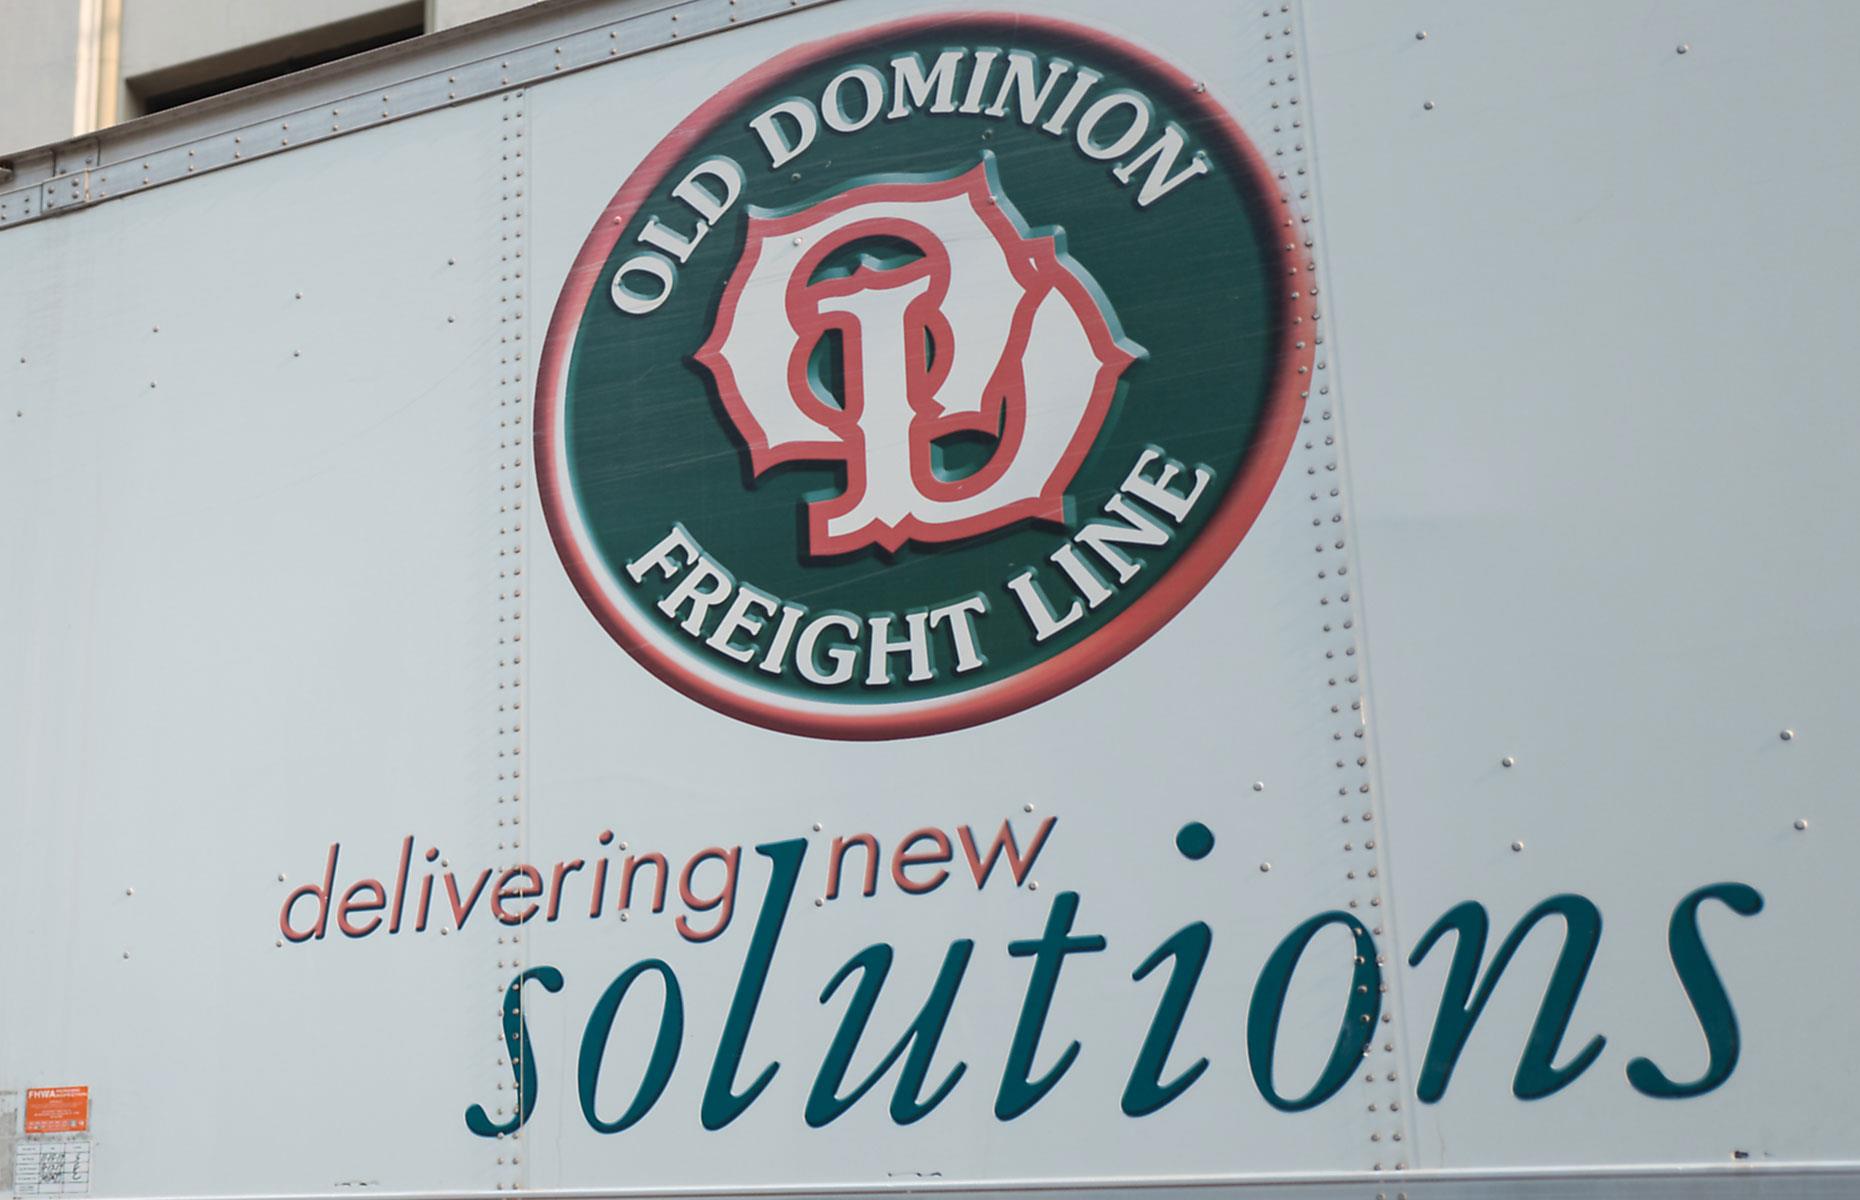 1991– Old Dominion Freight Line: $1,000 invested then is worth $1.645 million (£1.2m) + dividends today